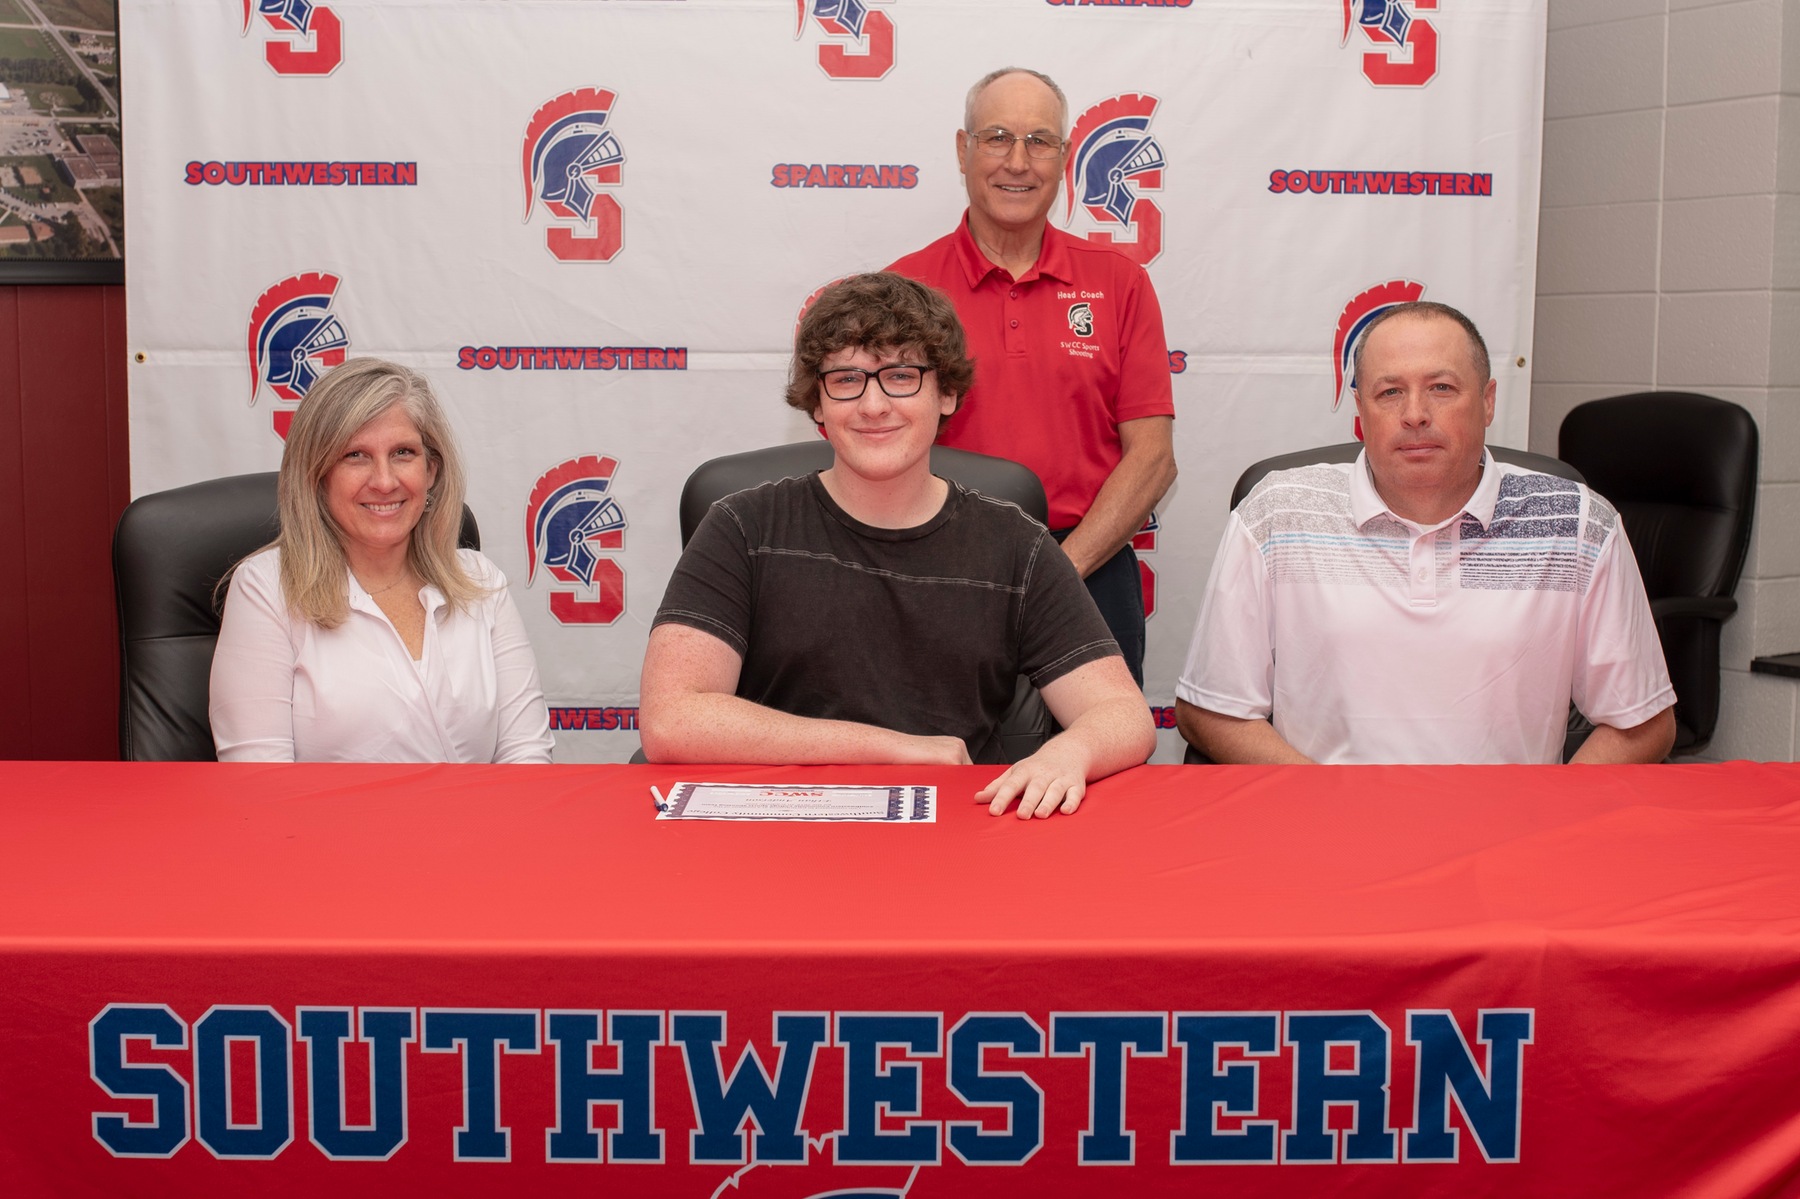 Ethan Anderson of Creston commits to the Southwestern sports shooting team for the 2019-20 season.